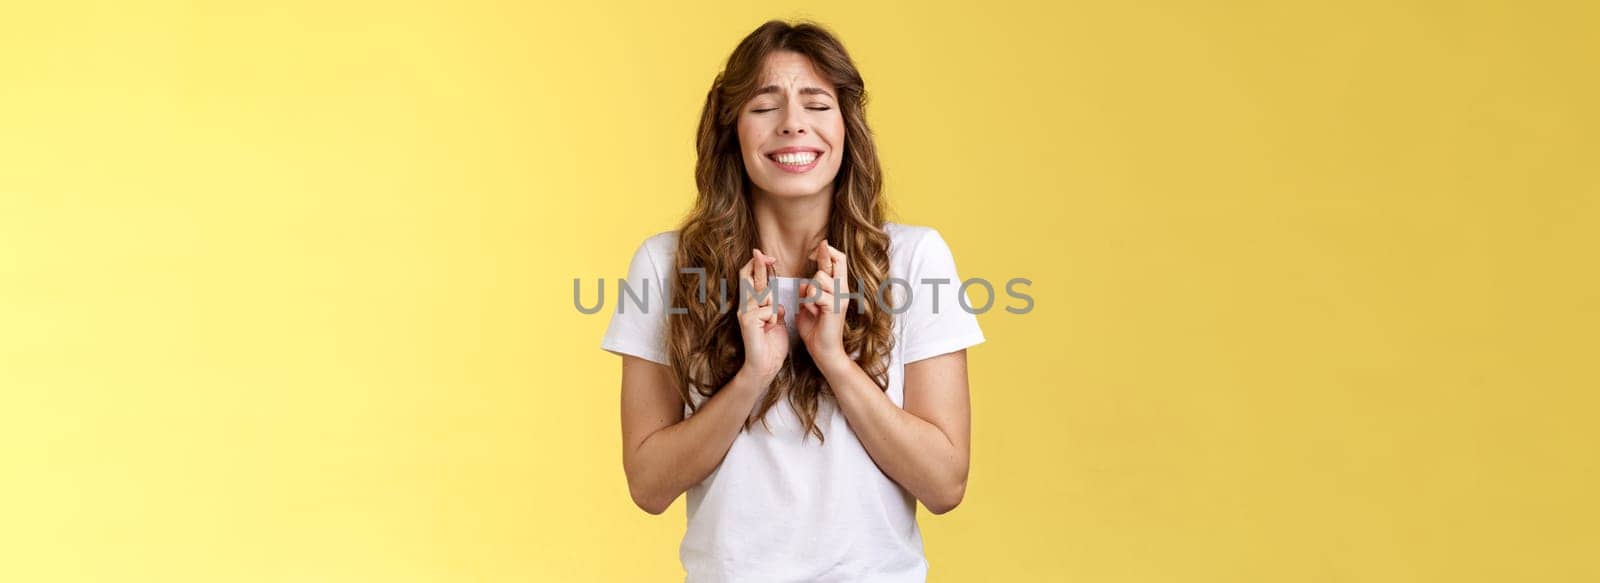 Wishes do come true if believe. Intense nervous cute hopeful pretty girl curly hairstyle close eyes clench teeth smiling hoping good news cross fingers good luck praying dream fulfill.